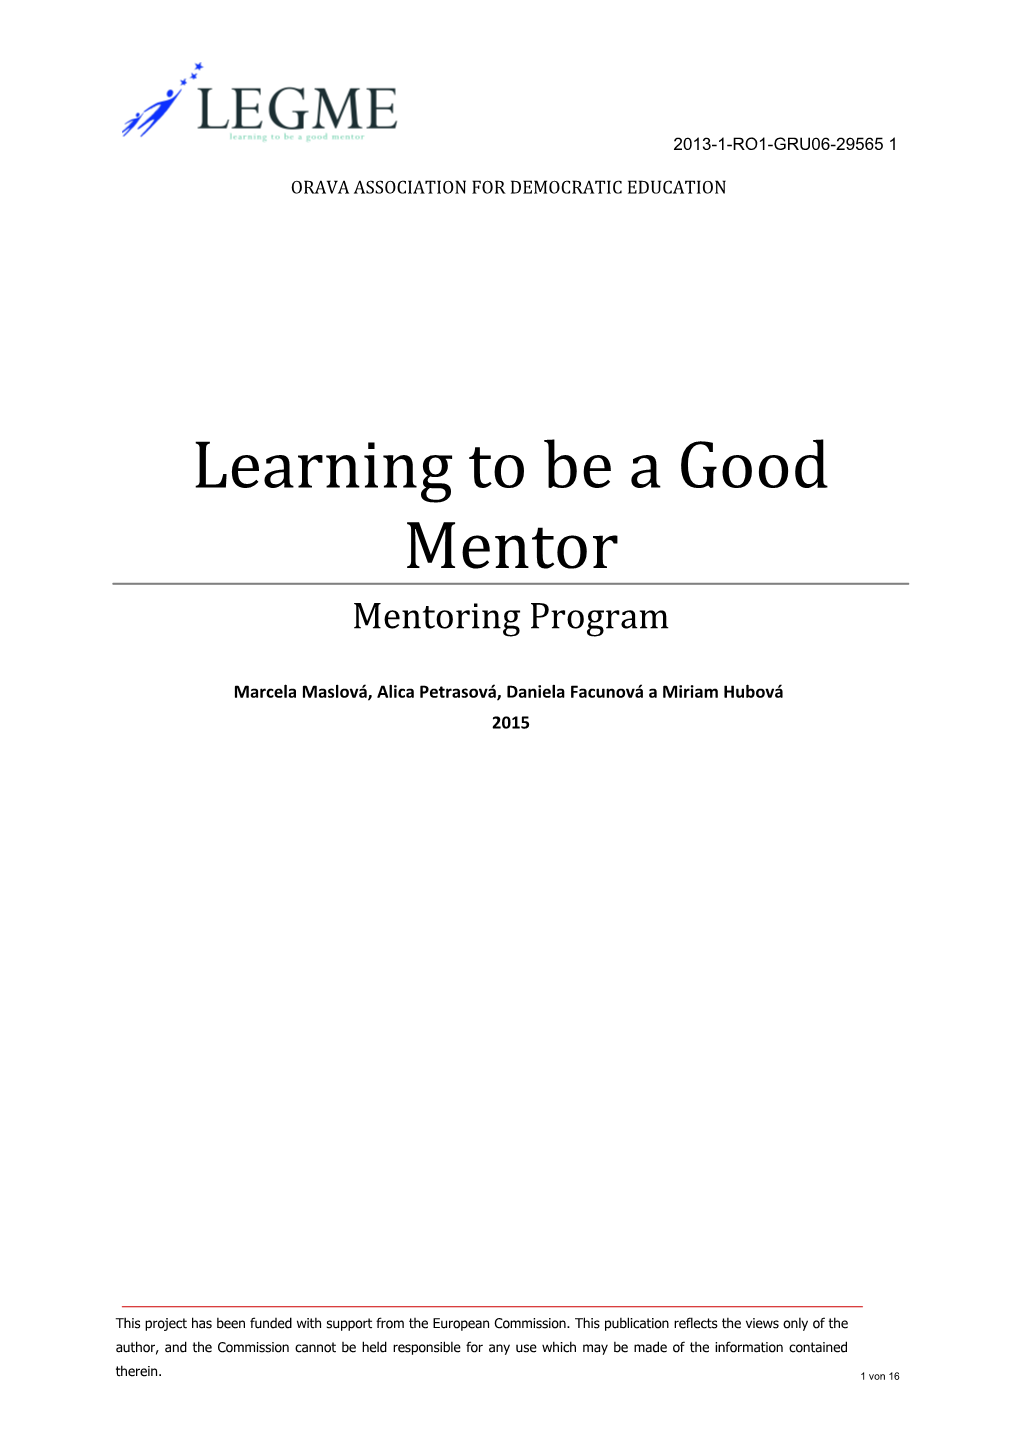 Learning to Be a Good Mentor